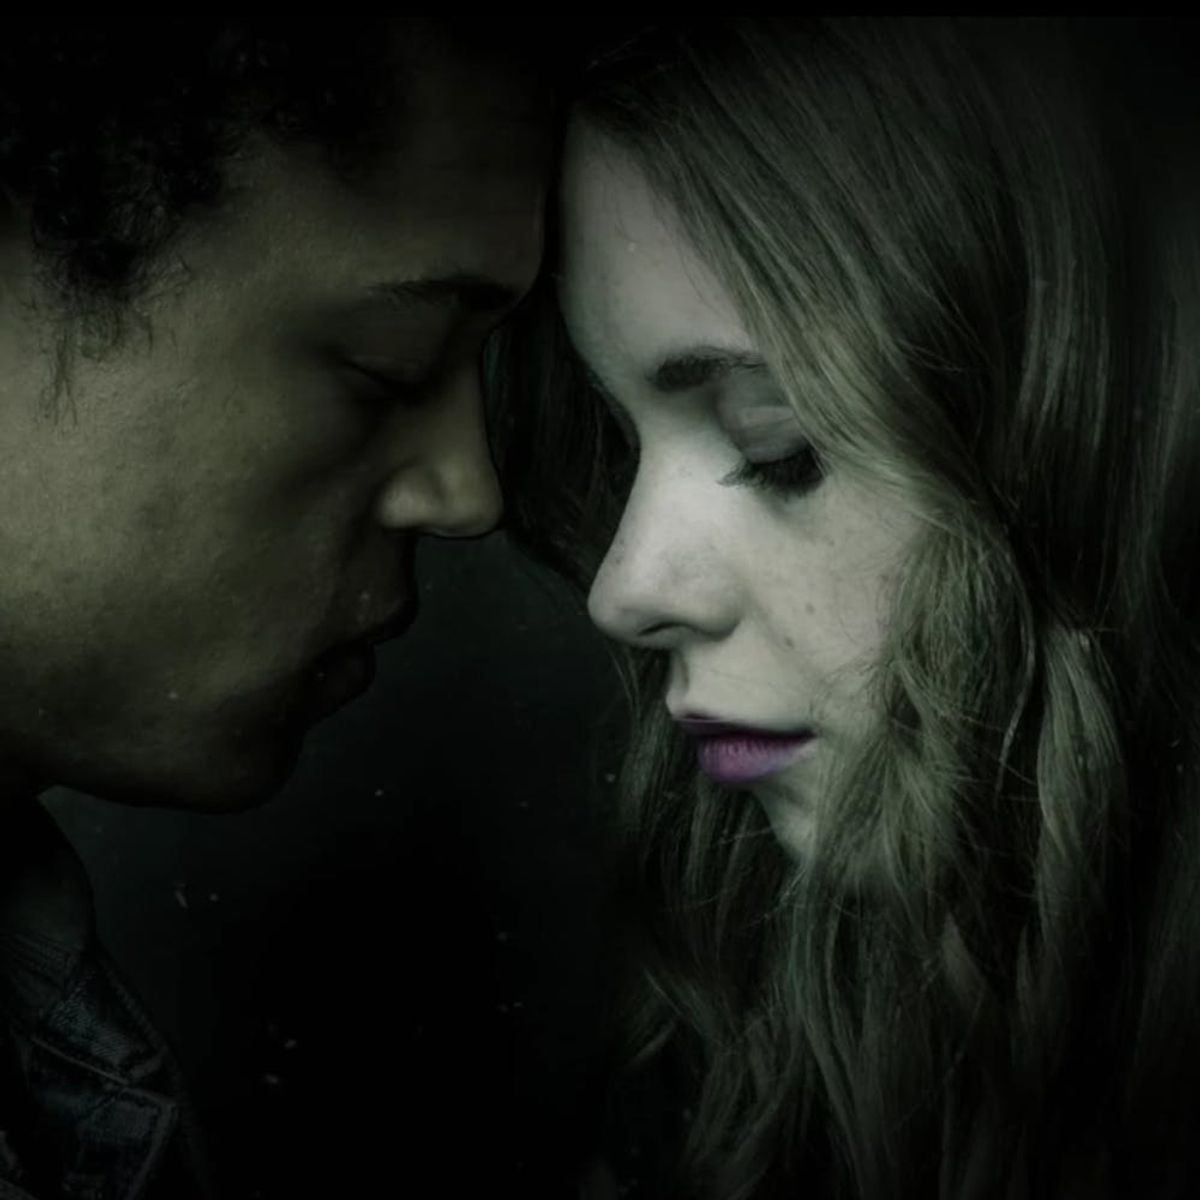 Netflix’s New Series ‘The Innocents’ Looks Like a Truly Haunting Tale of Supernatural Teen Romance